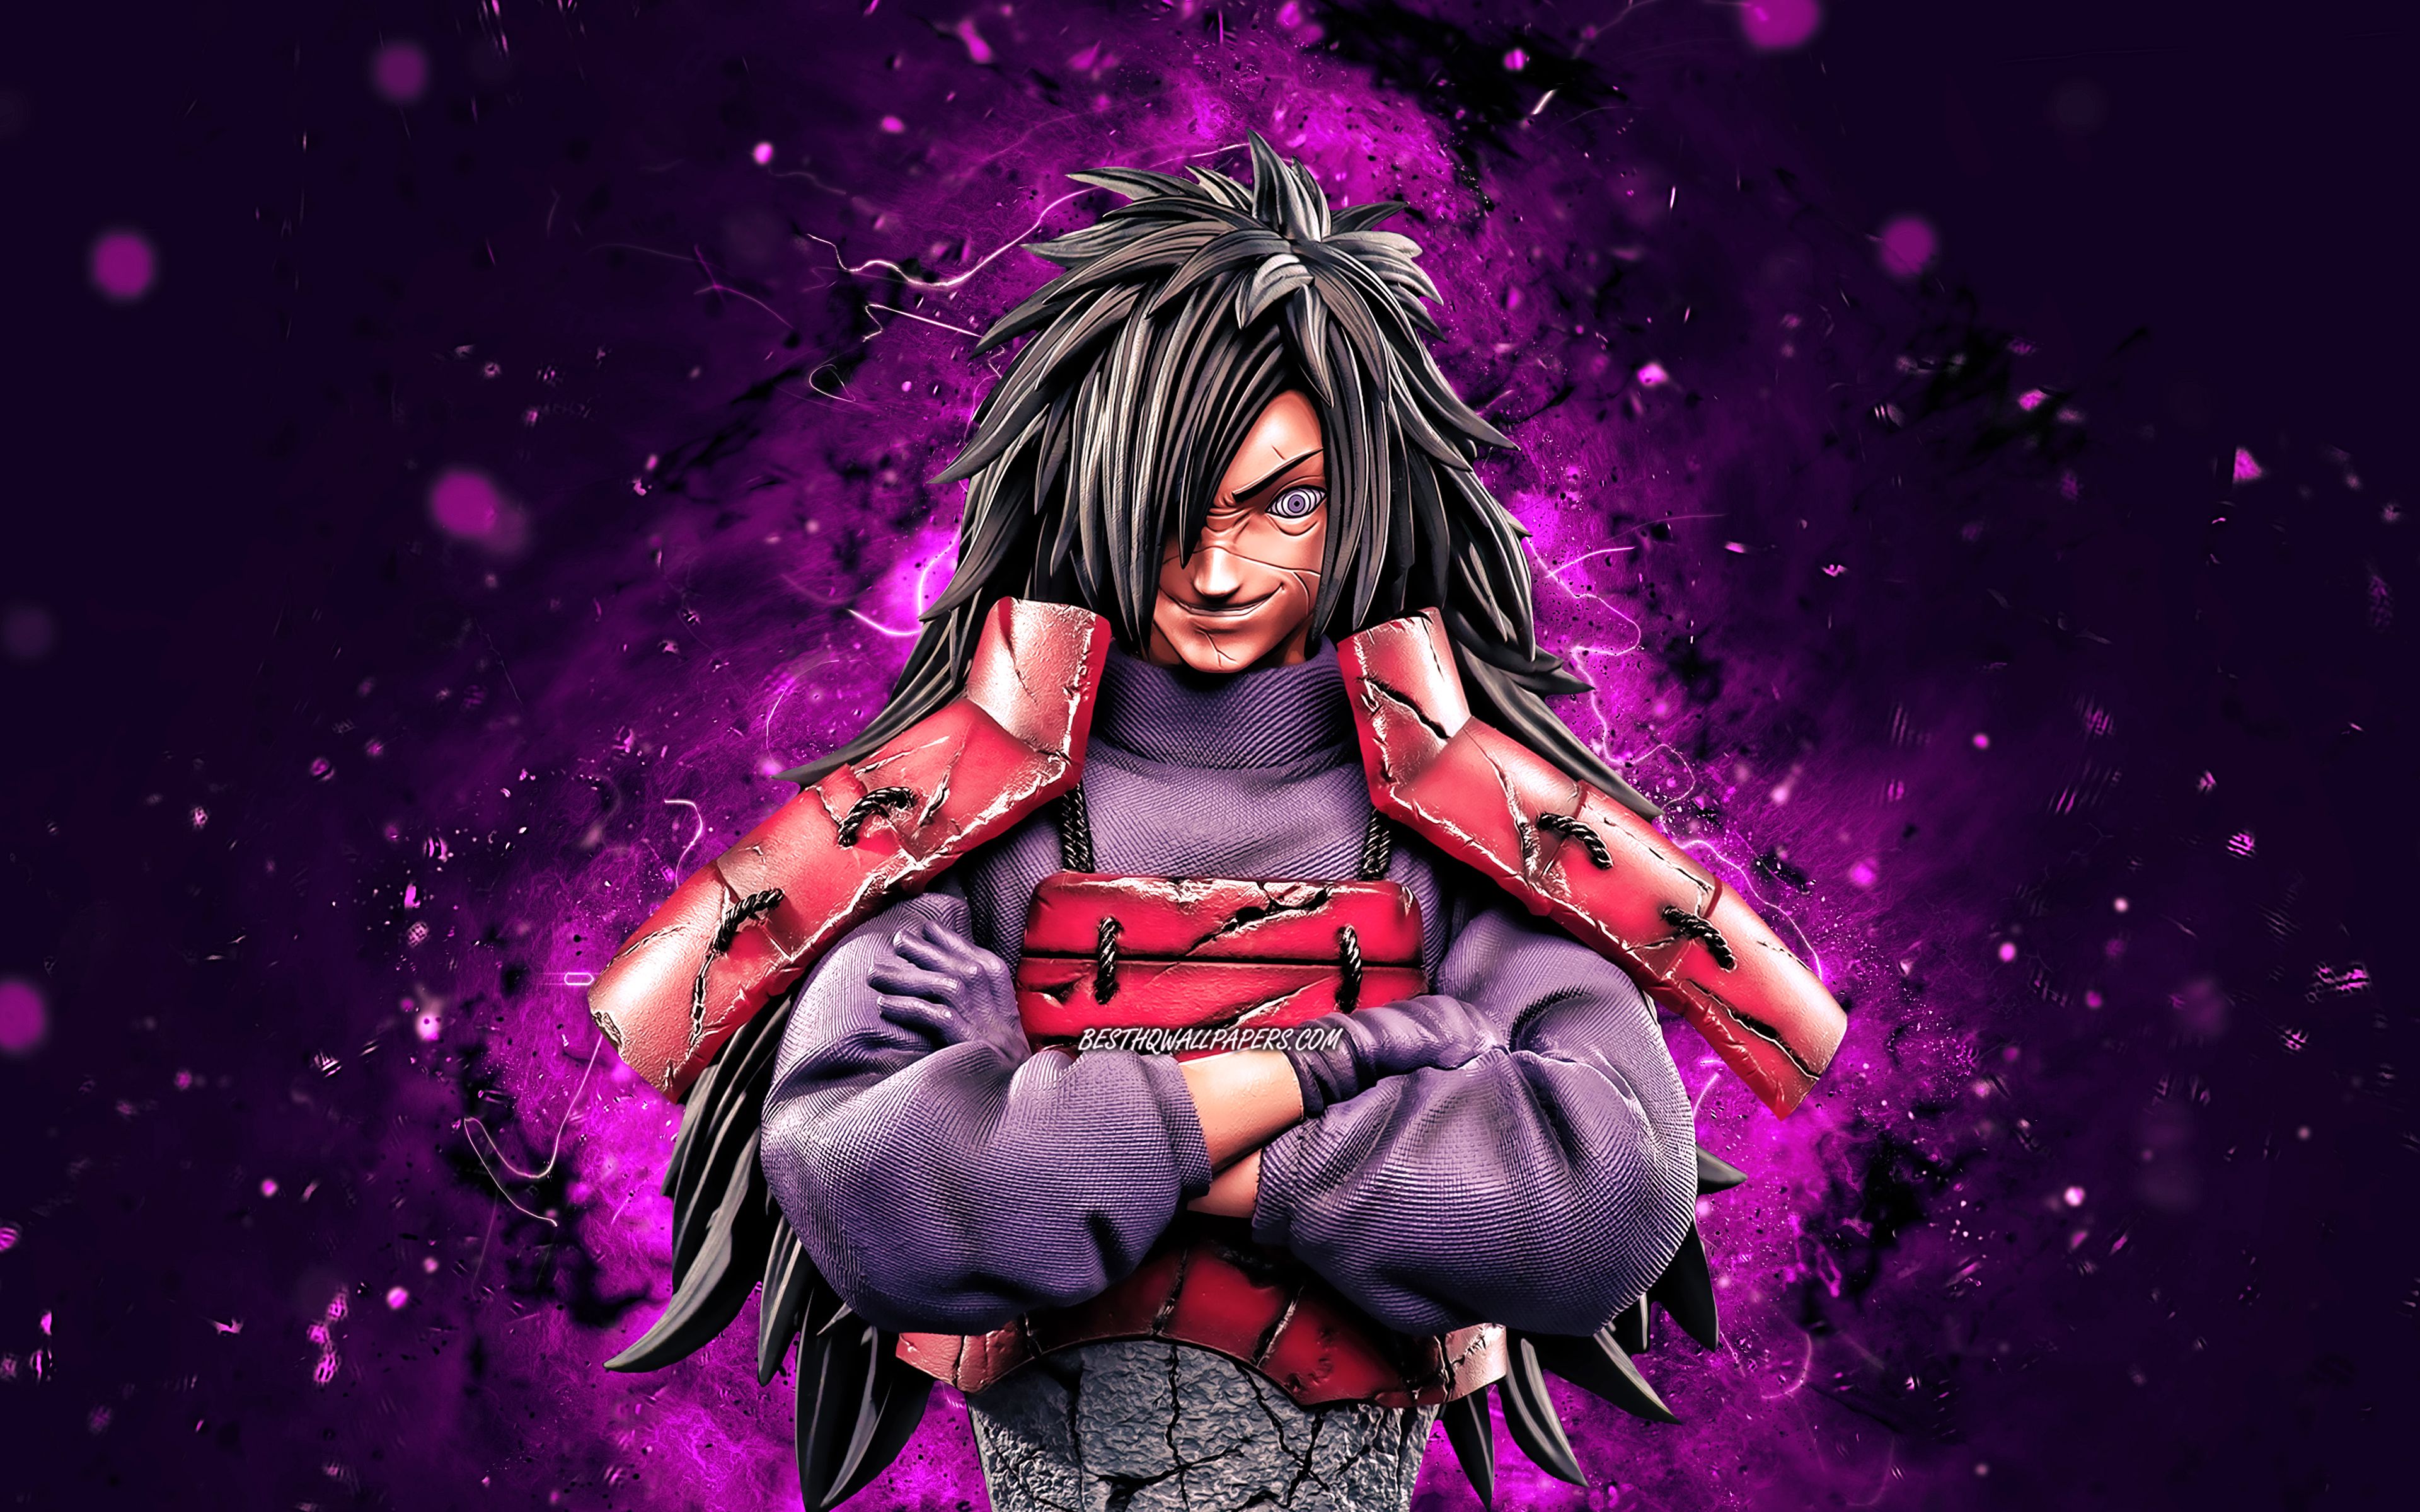 Download wallpaper Madara Uchiha, 4k, violet neon lights, Naruto characters, protagonist, Naruto, manga, Uchiha Madara, samurai, Madara Uchiha Naruto for desktop with resolution 3840x2400. High Quality HD picture wallpaper